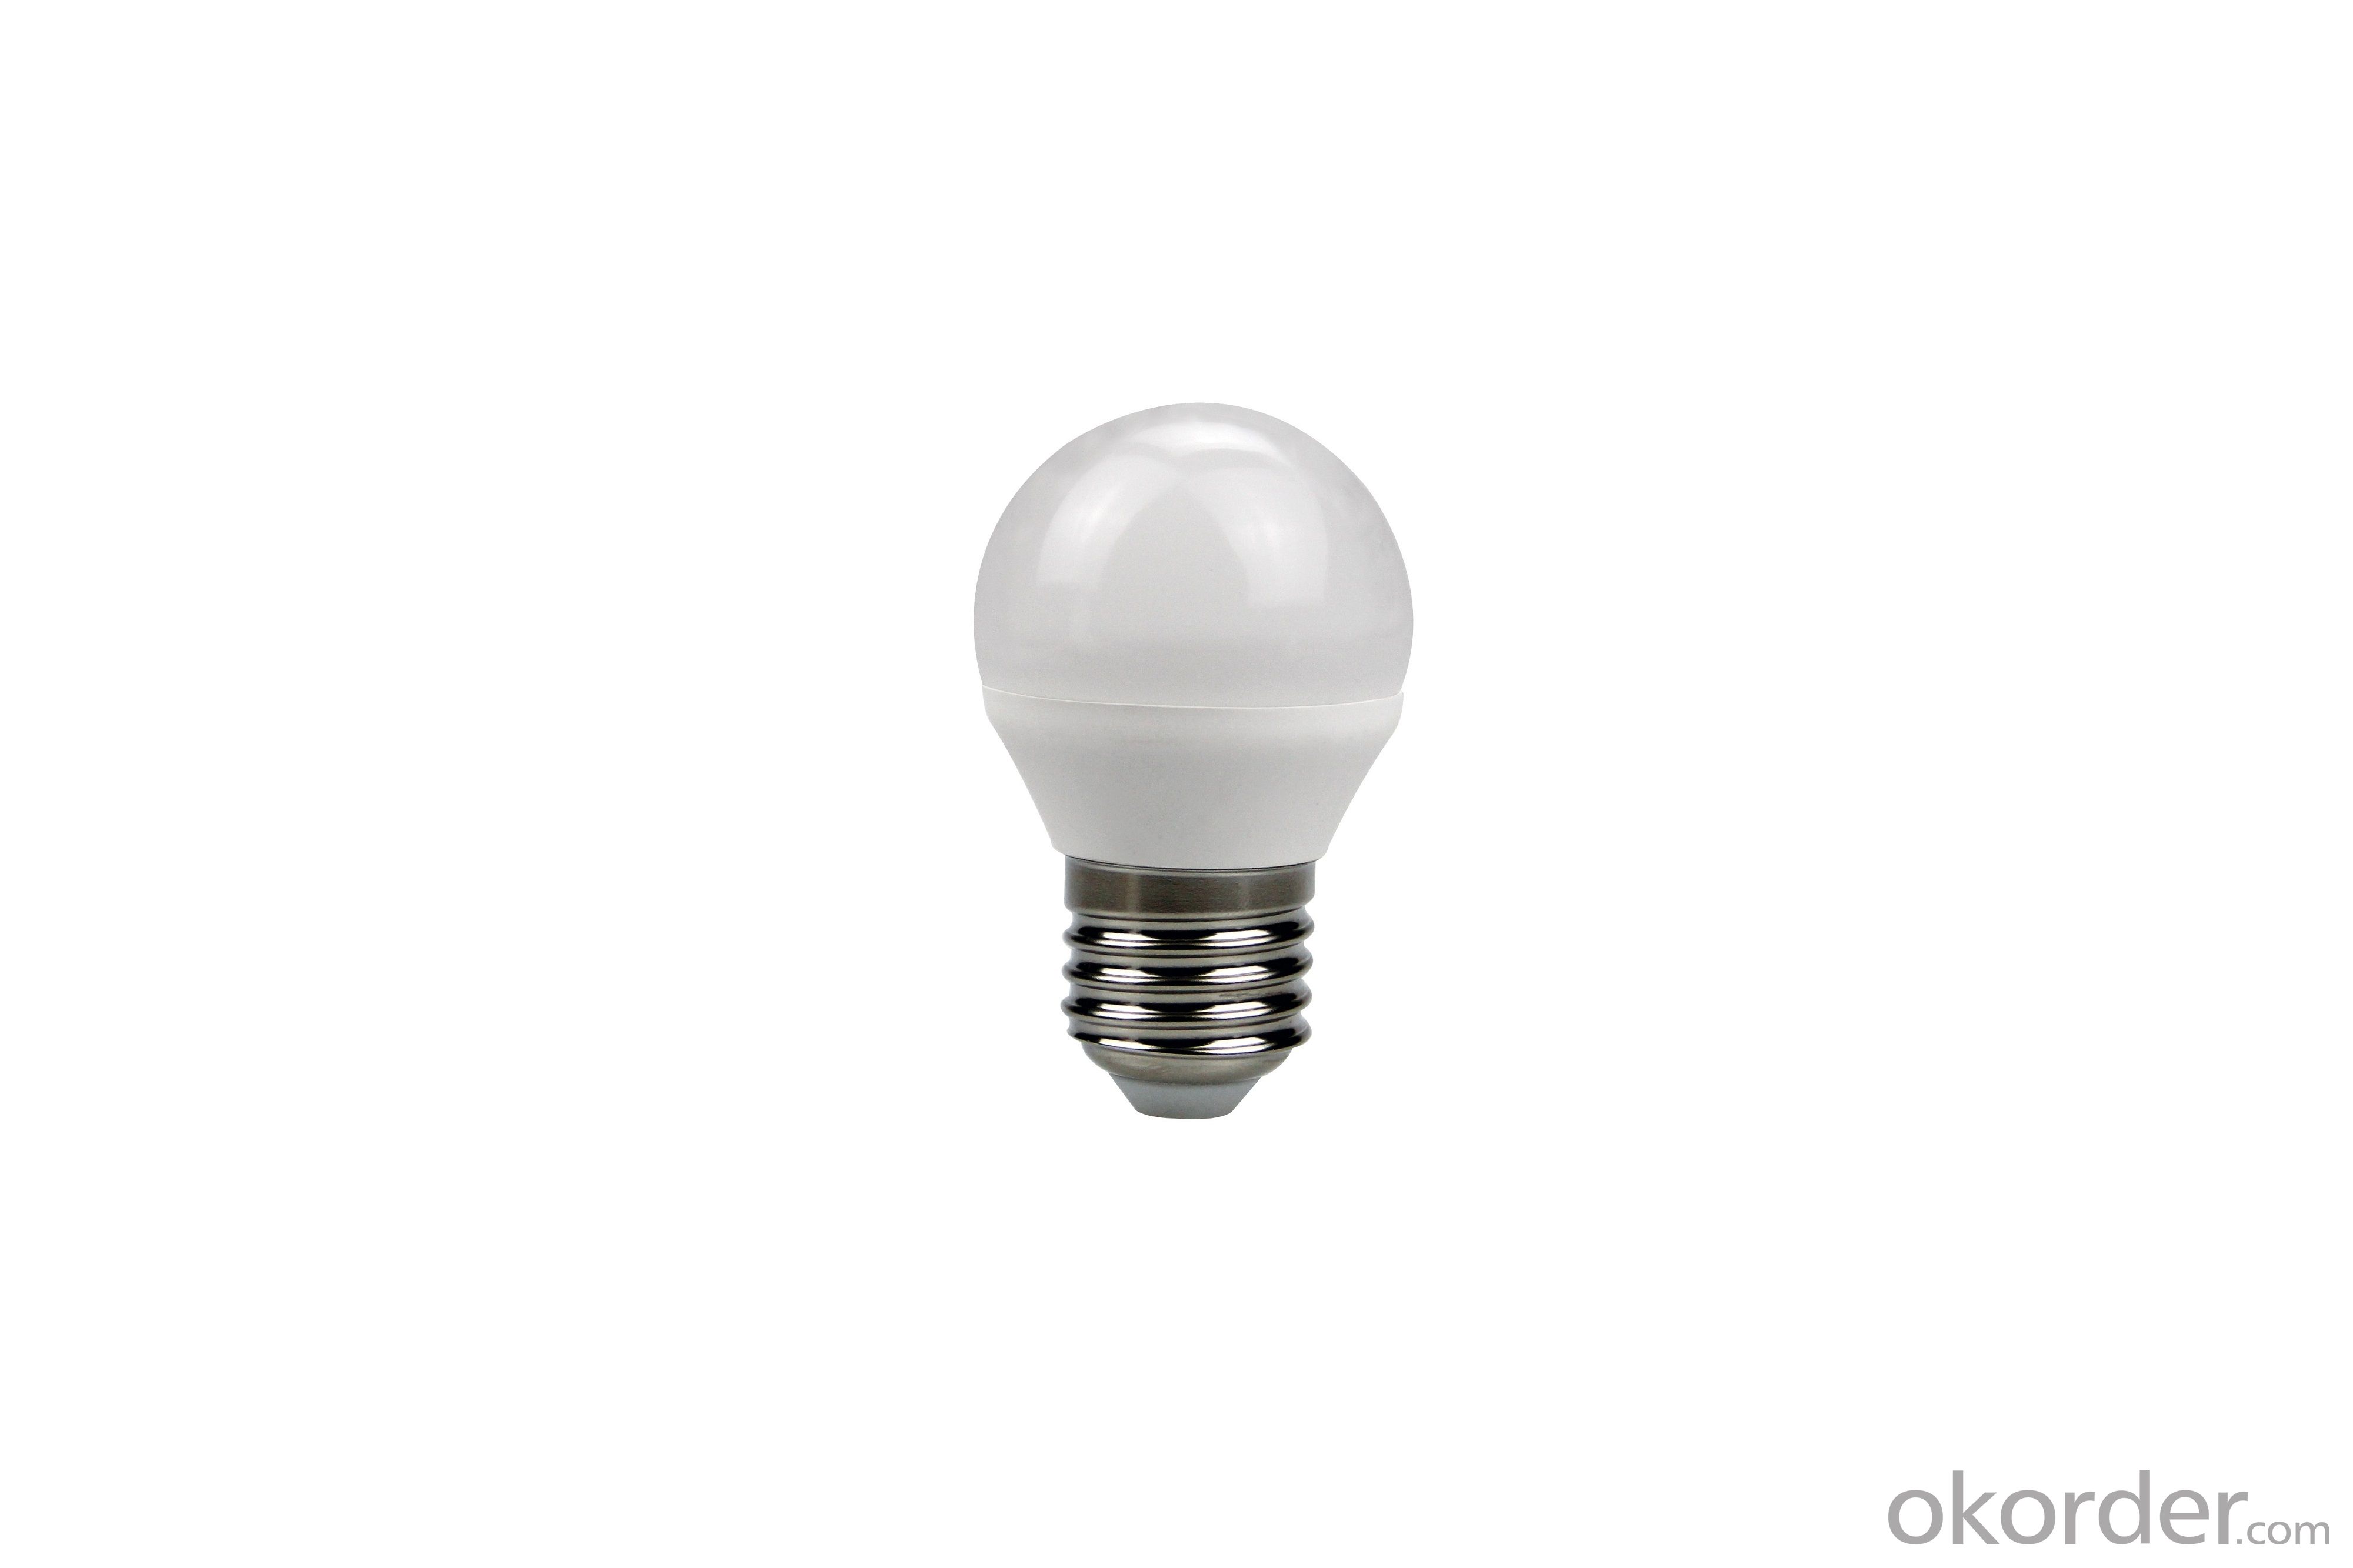 LED Bulb Light E14 B45 9W Lumen Non Dimmable real-time quotes, last-sale prices -Okorder.com